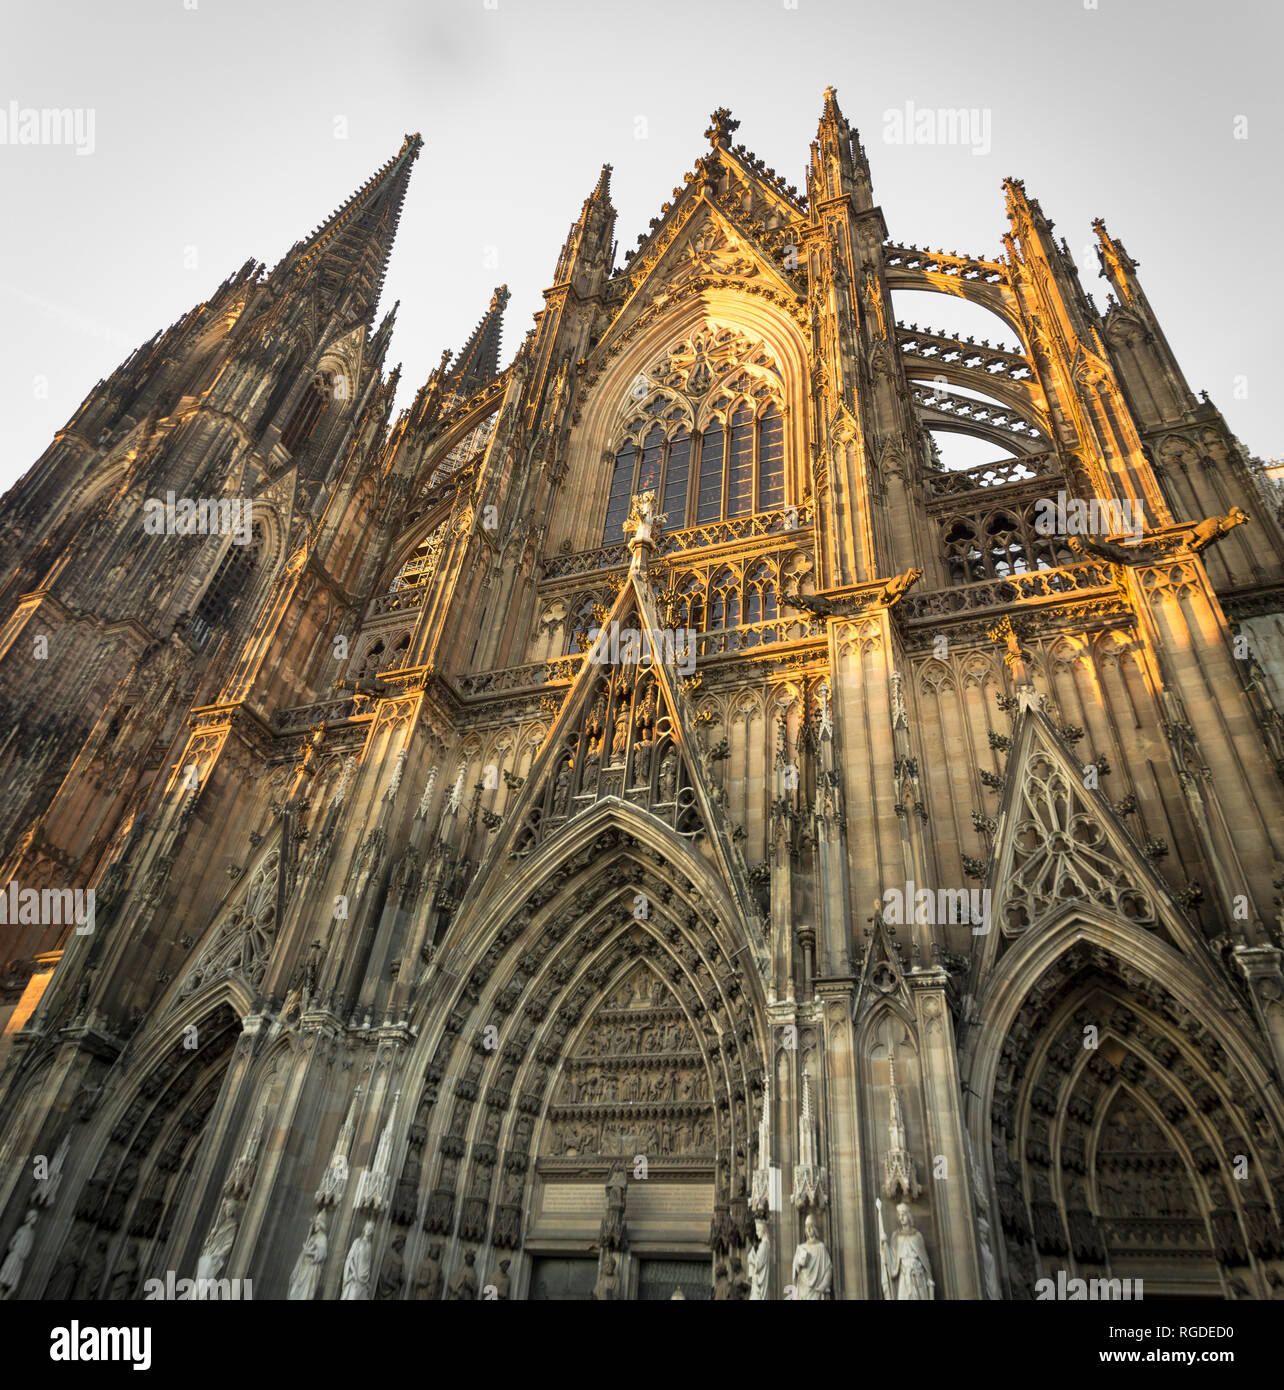 Germany, Cologne, view of Southern side of Cologne Cathredal by sunset Stock Photo